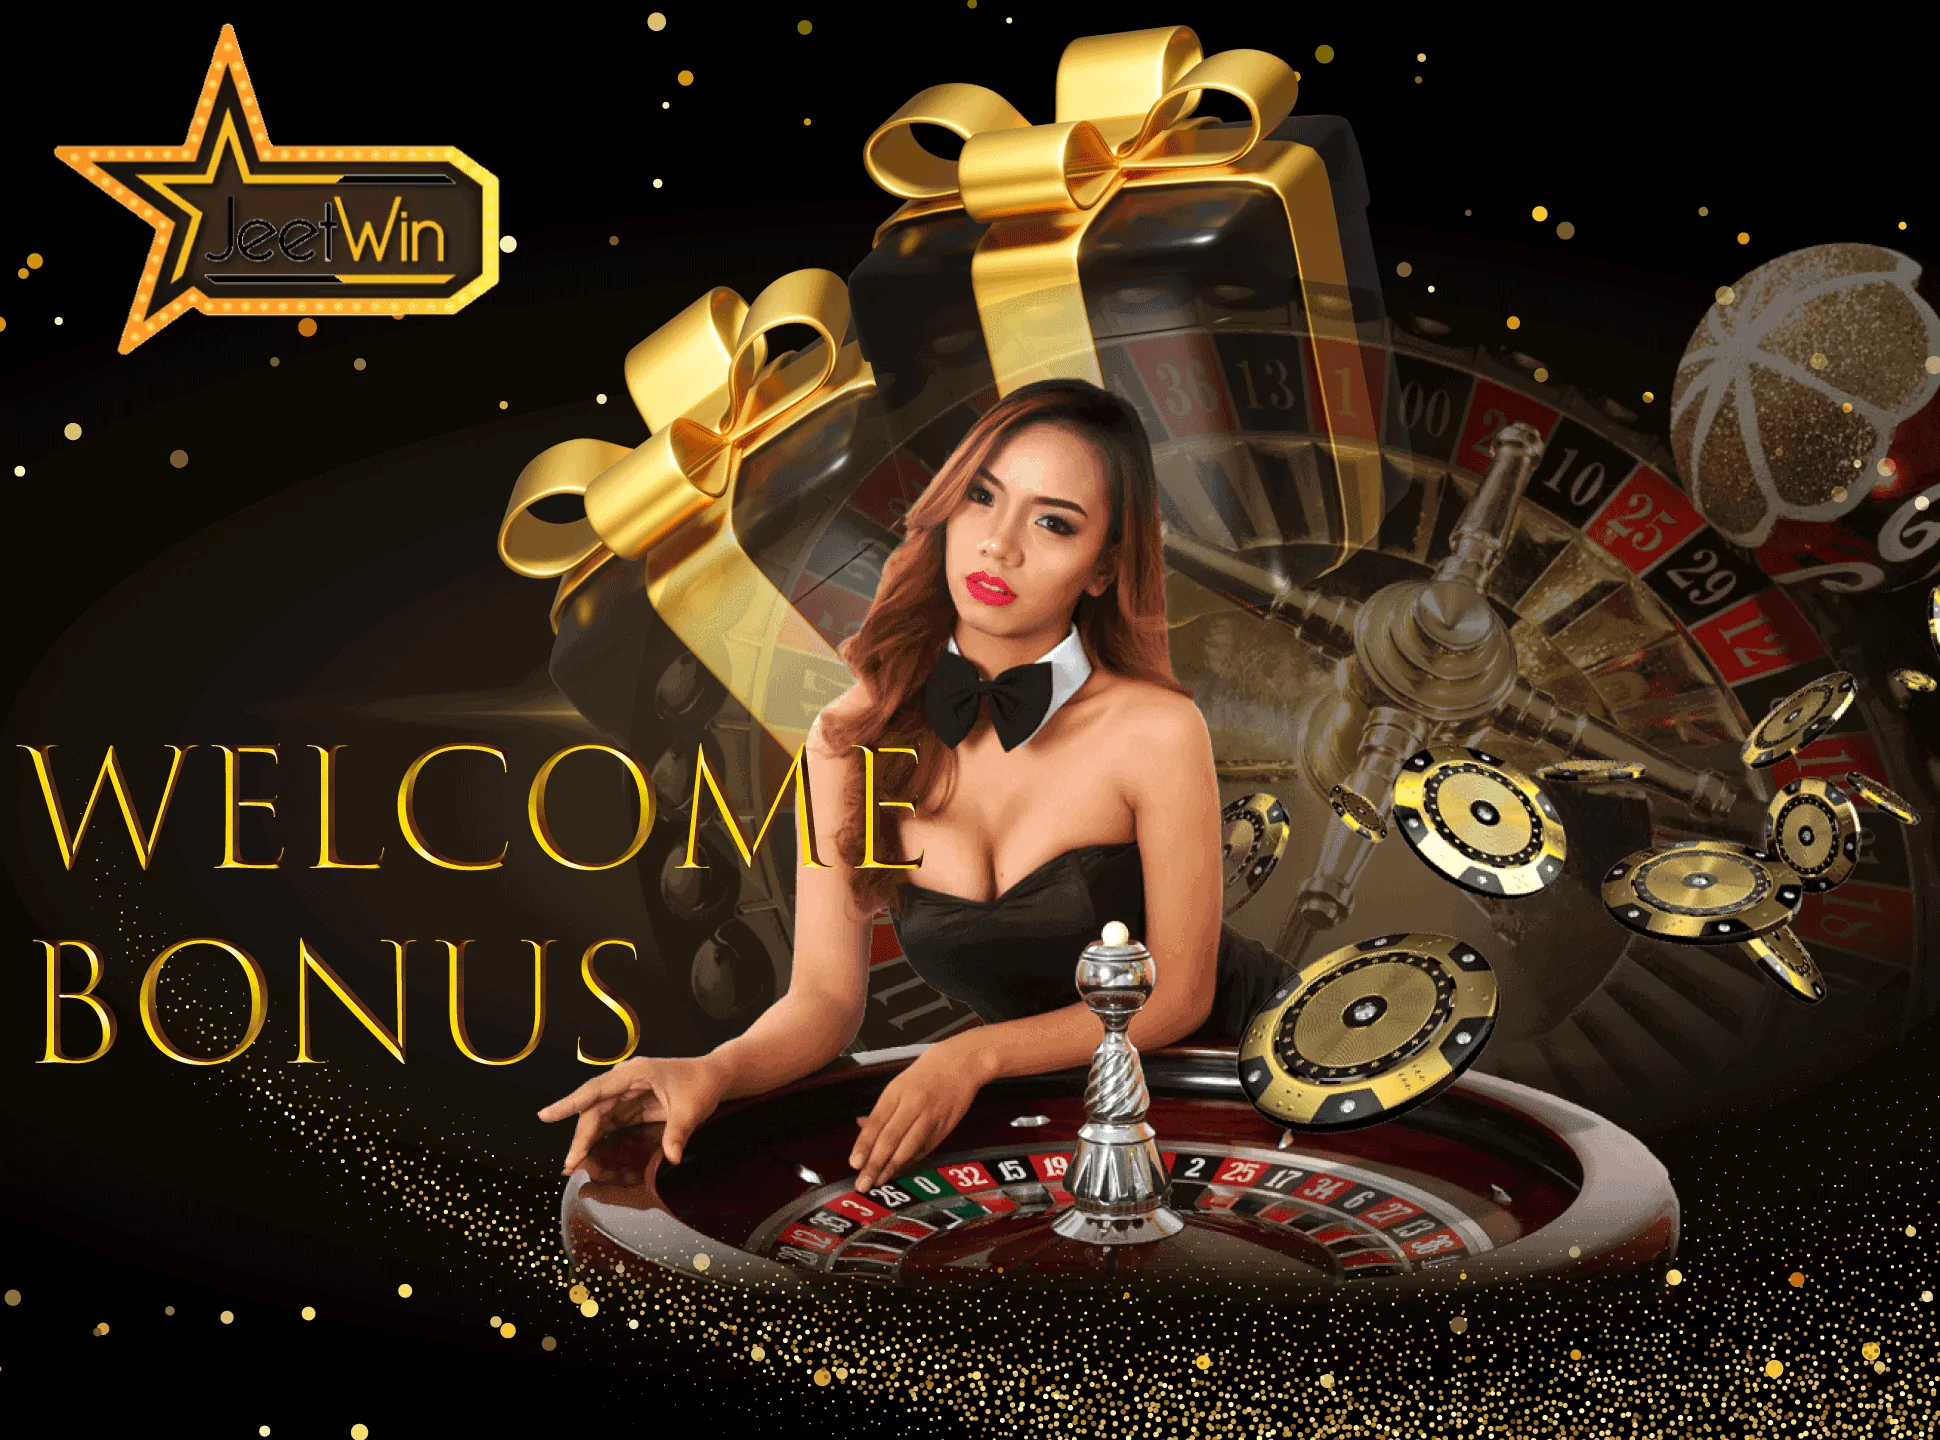 A new Jeetwin user can get up to 15,000 INR as a welcome bonus.